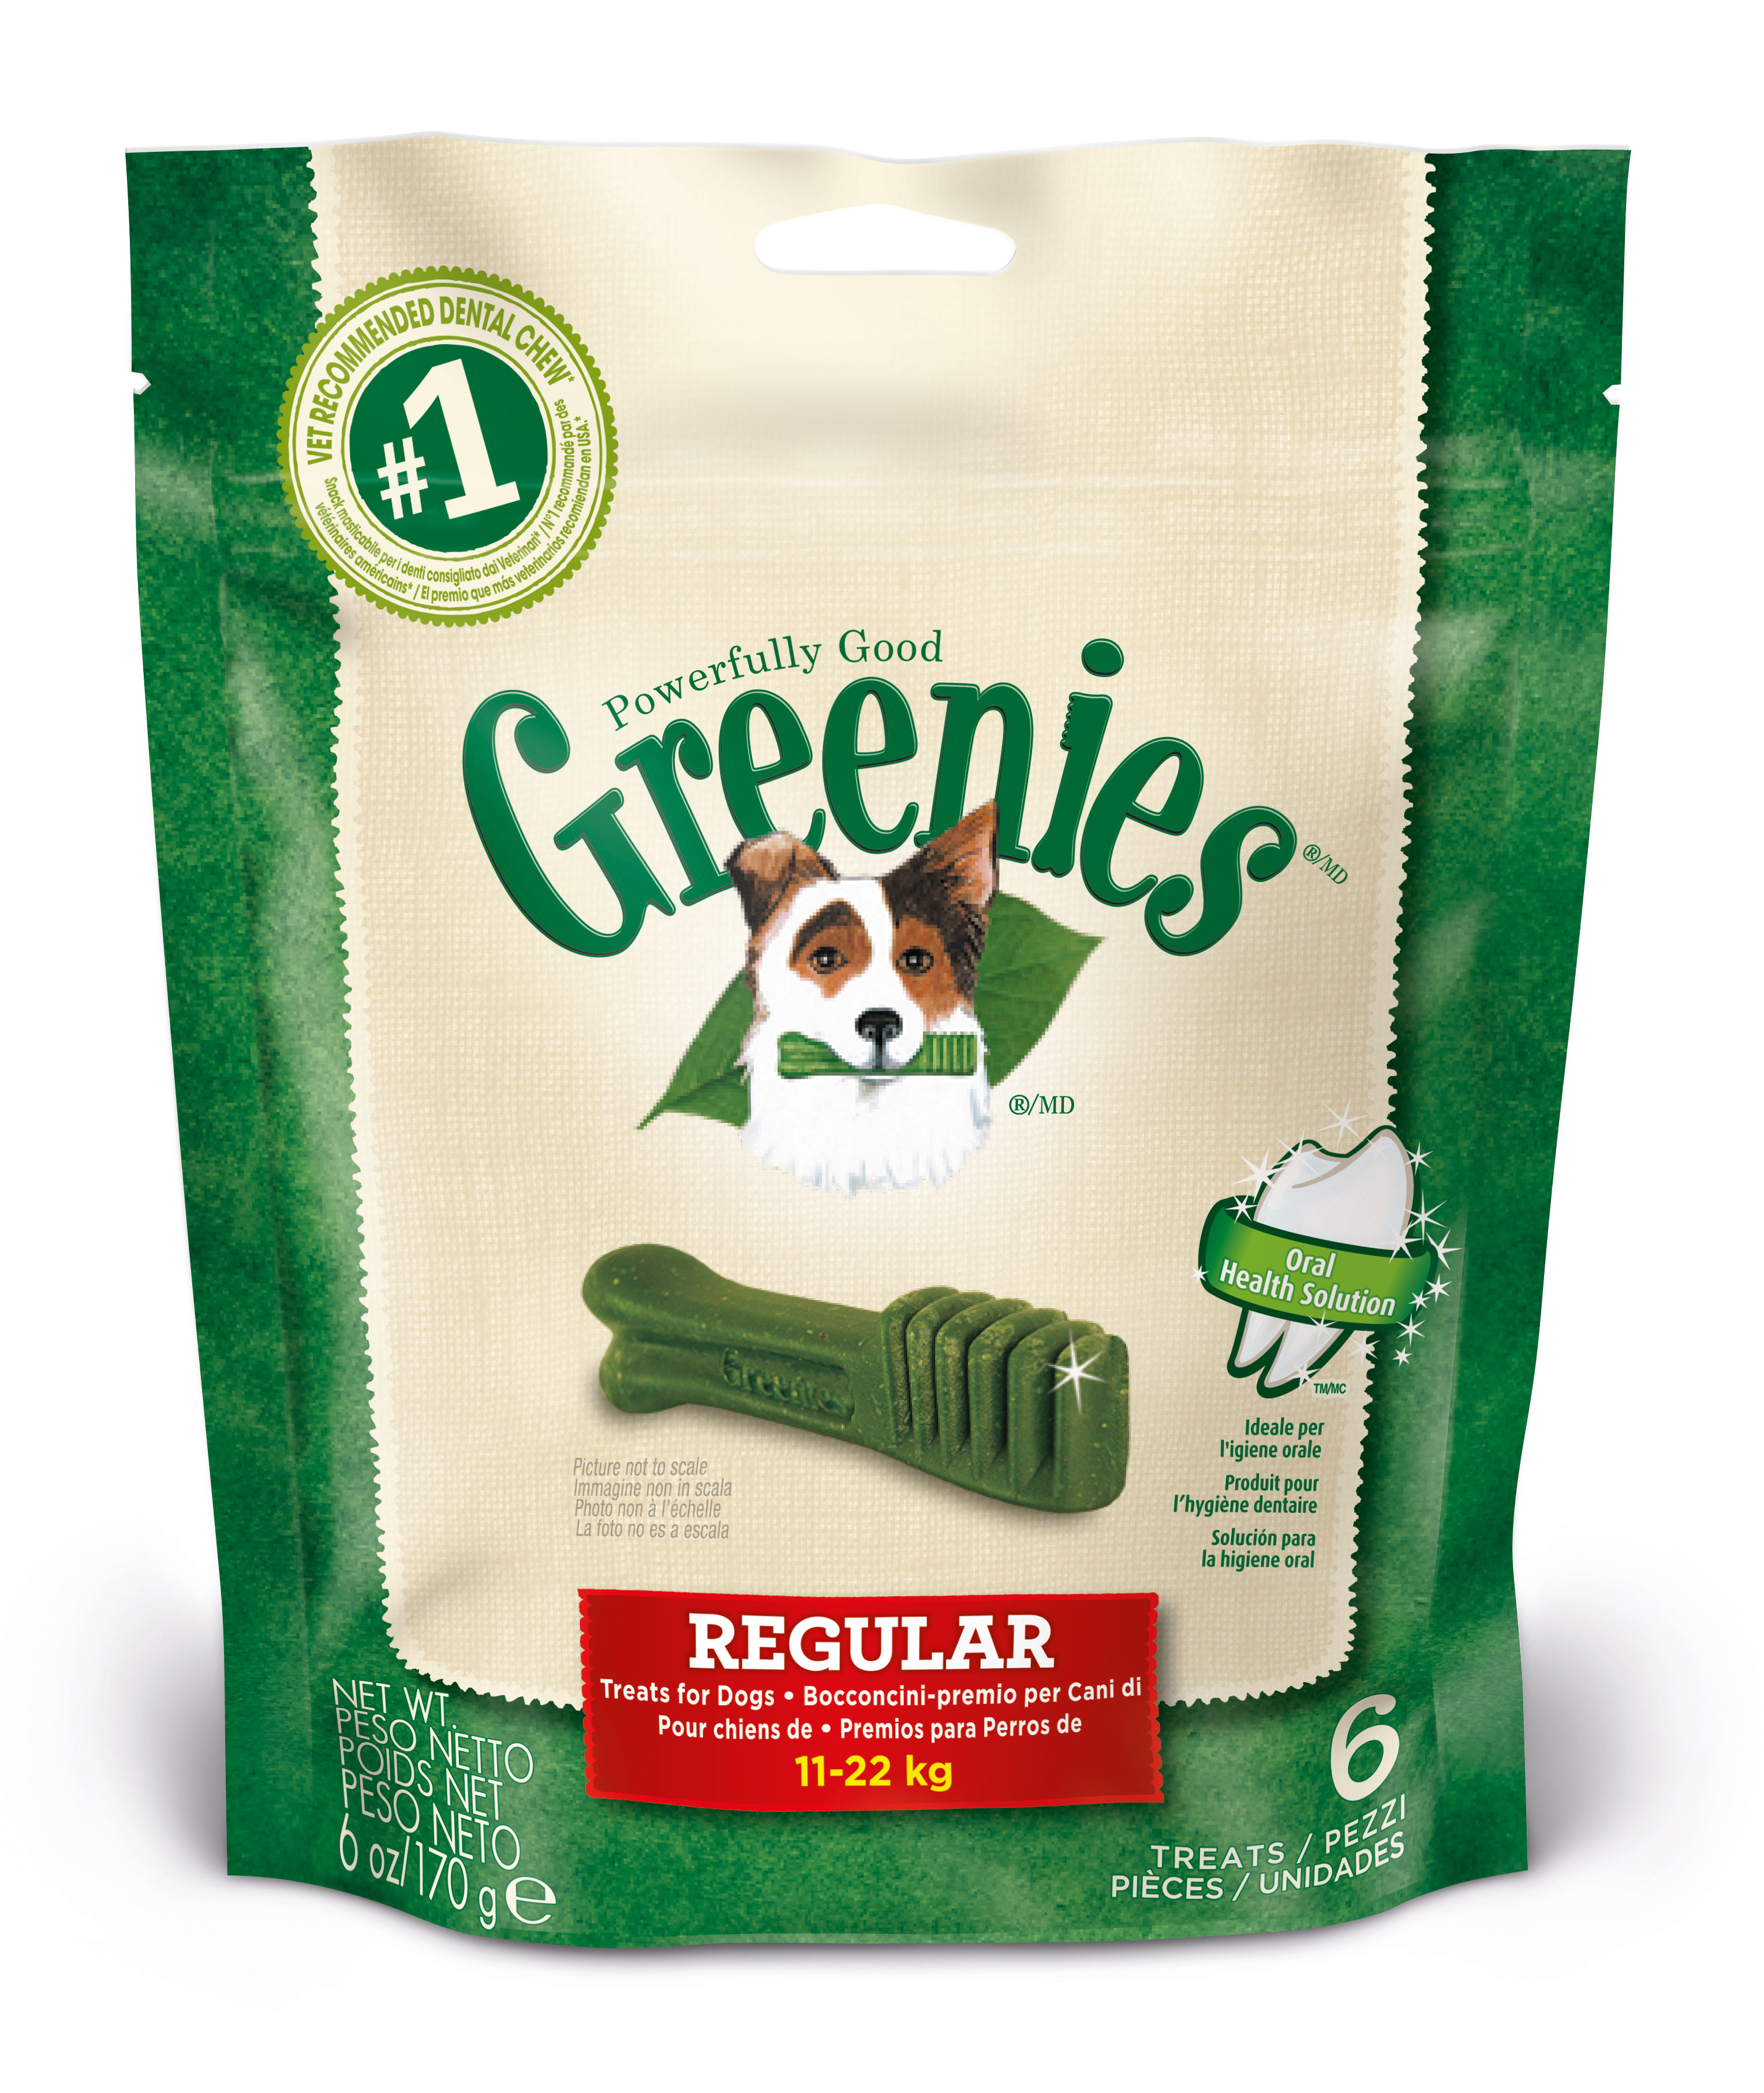 October is Ron's Pets Greenies Dental Month Ron's Pets Supplies